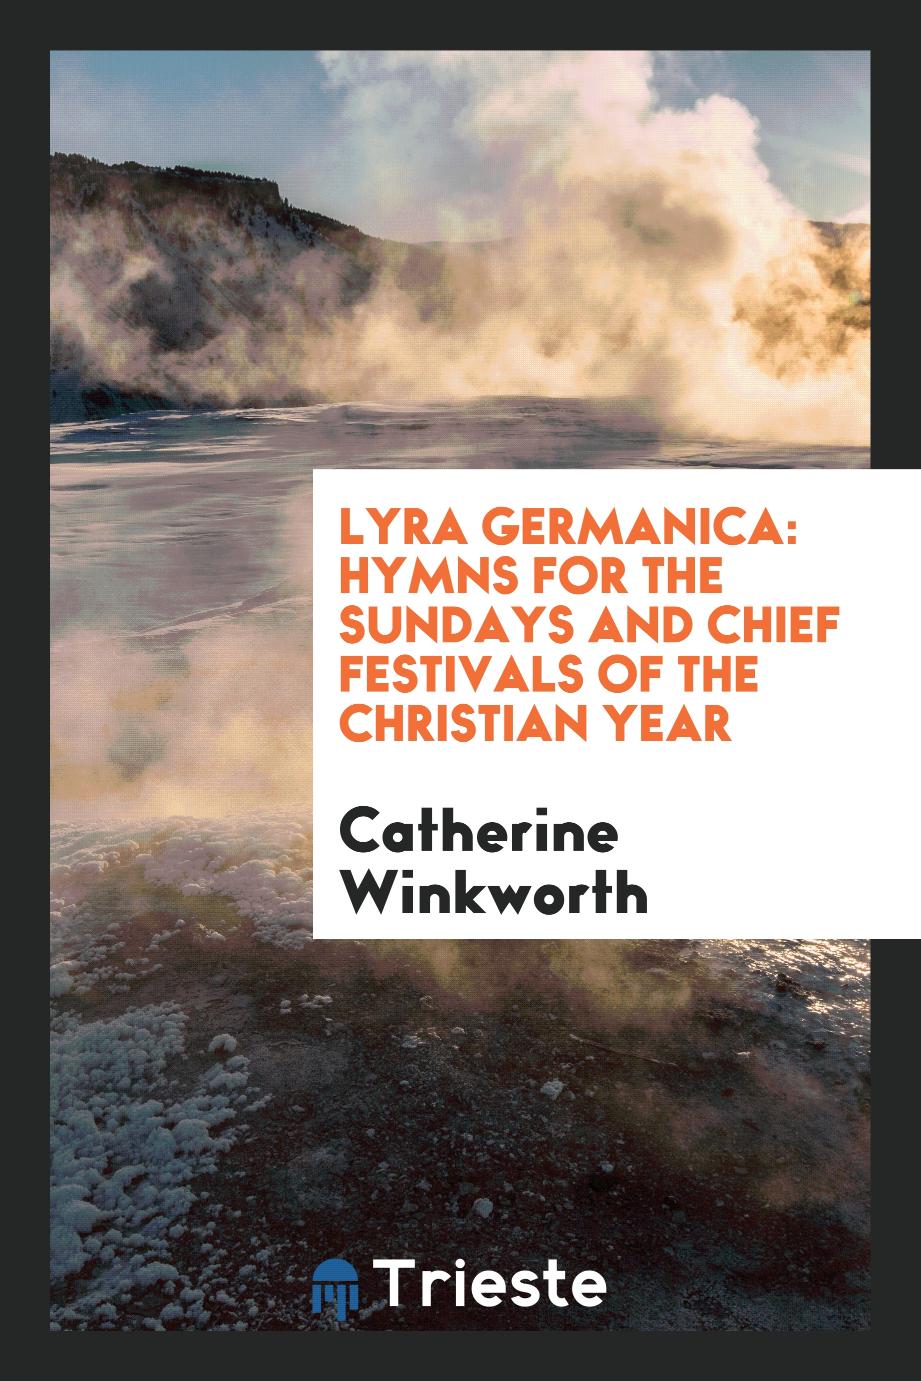 Lyra Germanica: hymns for the Sundays and chief festivals of the Christian year